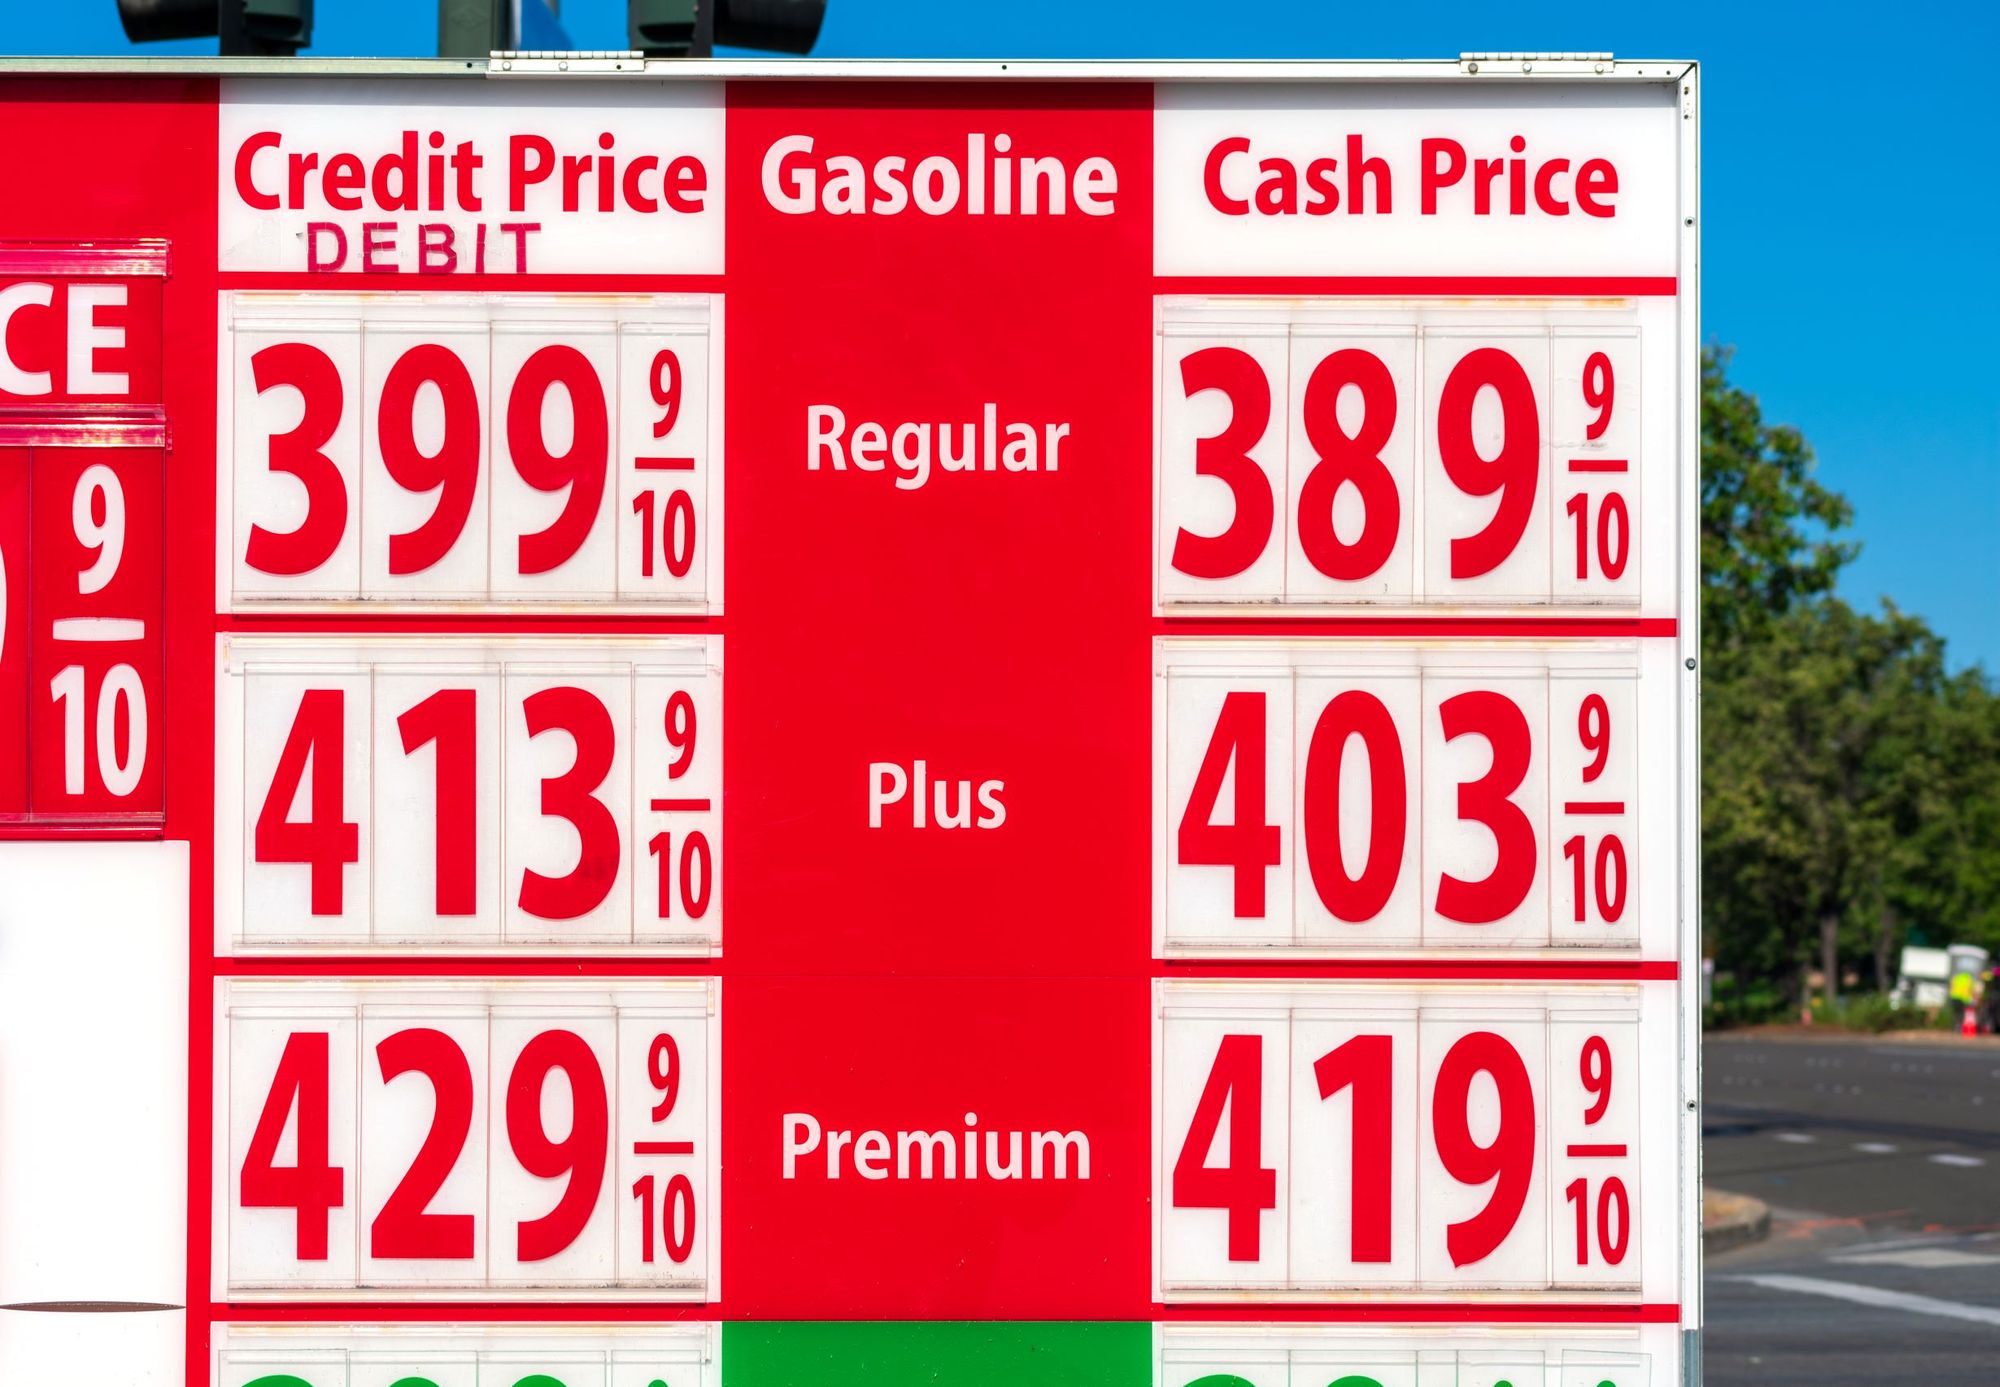 An example of dual pricing / cash discounting: a gas station sign with both credit prices and cash prices 